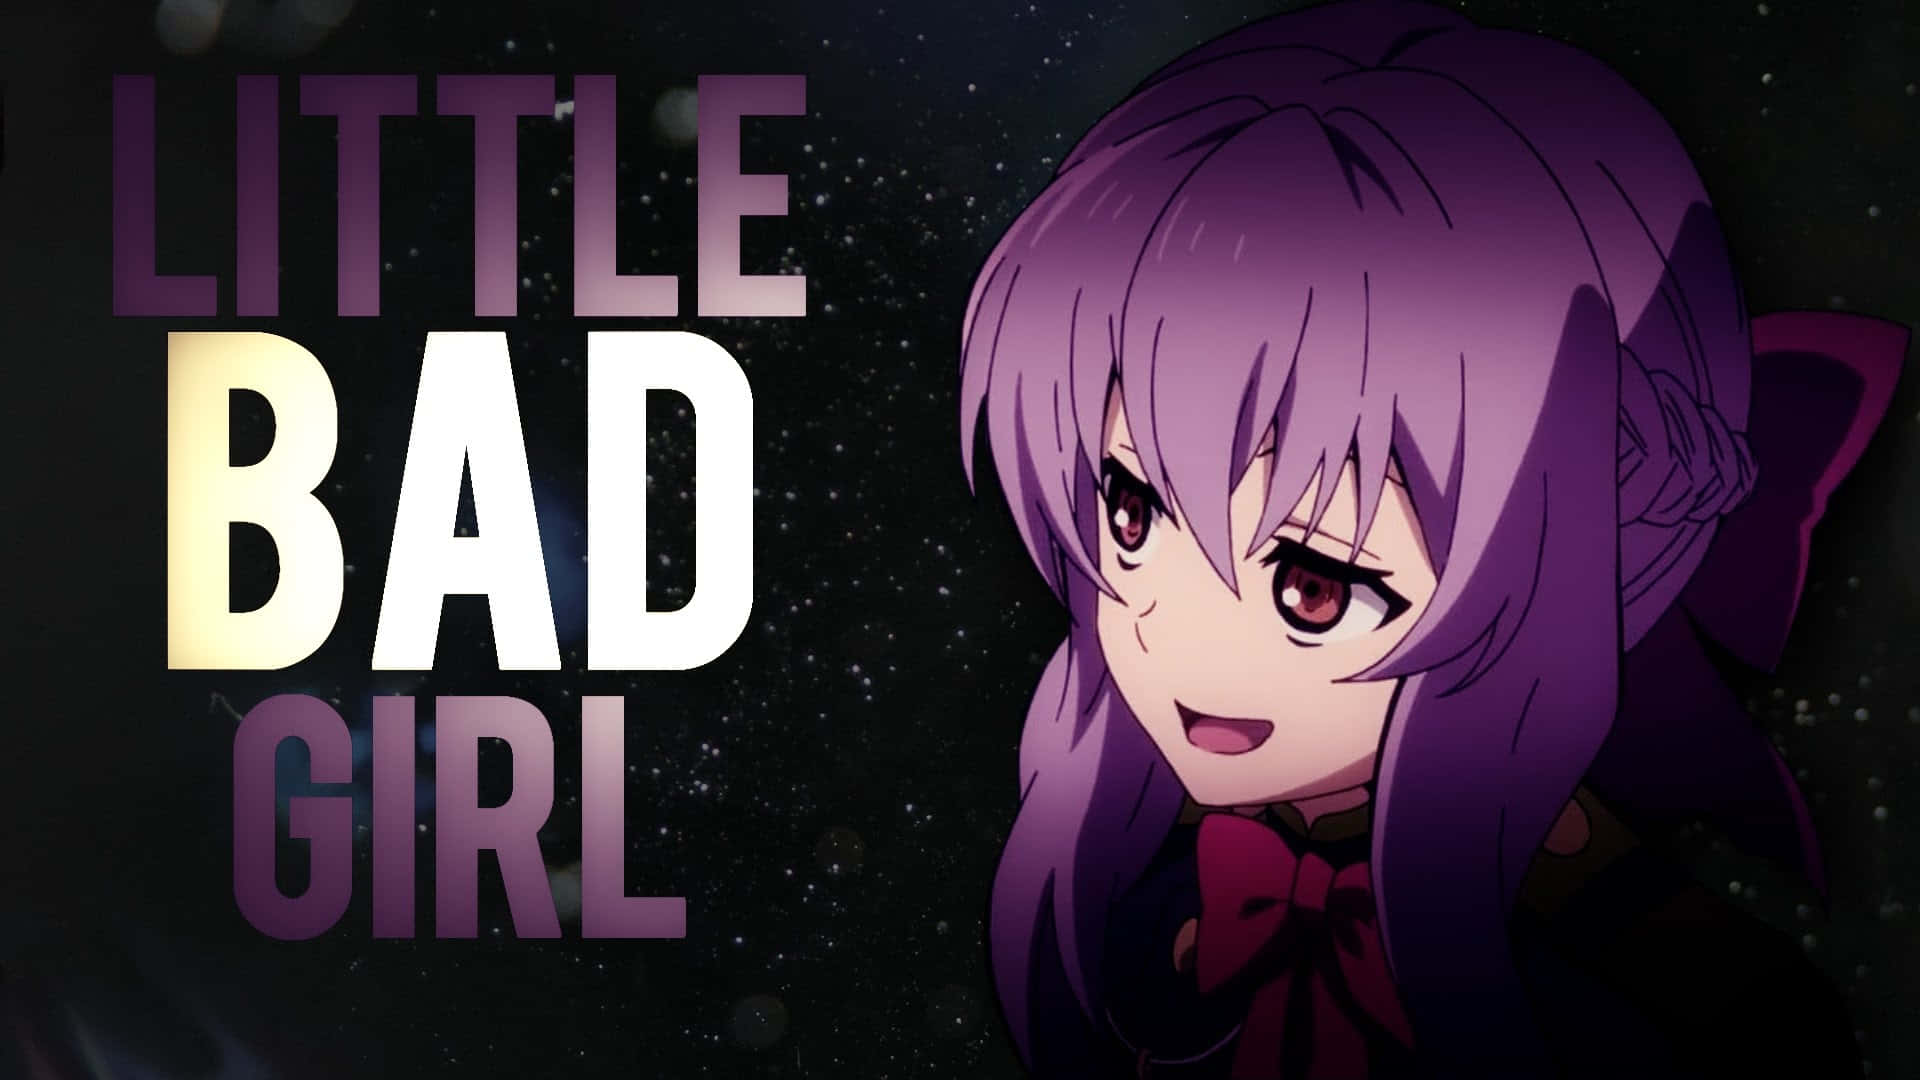 Little Bad Girl - A Girl With Purple Hair